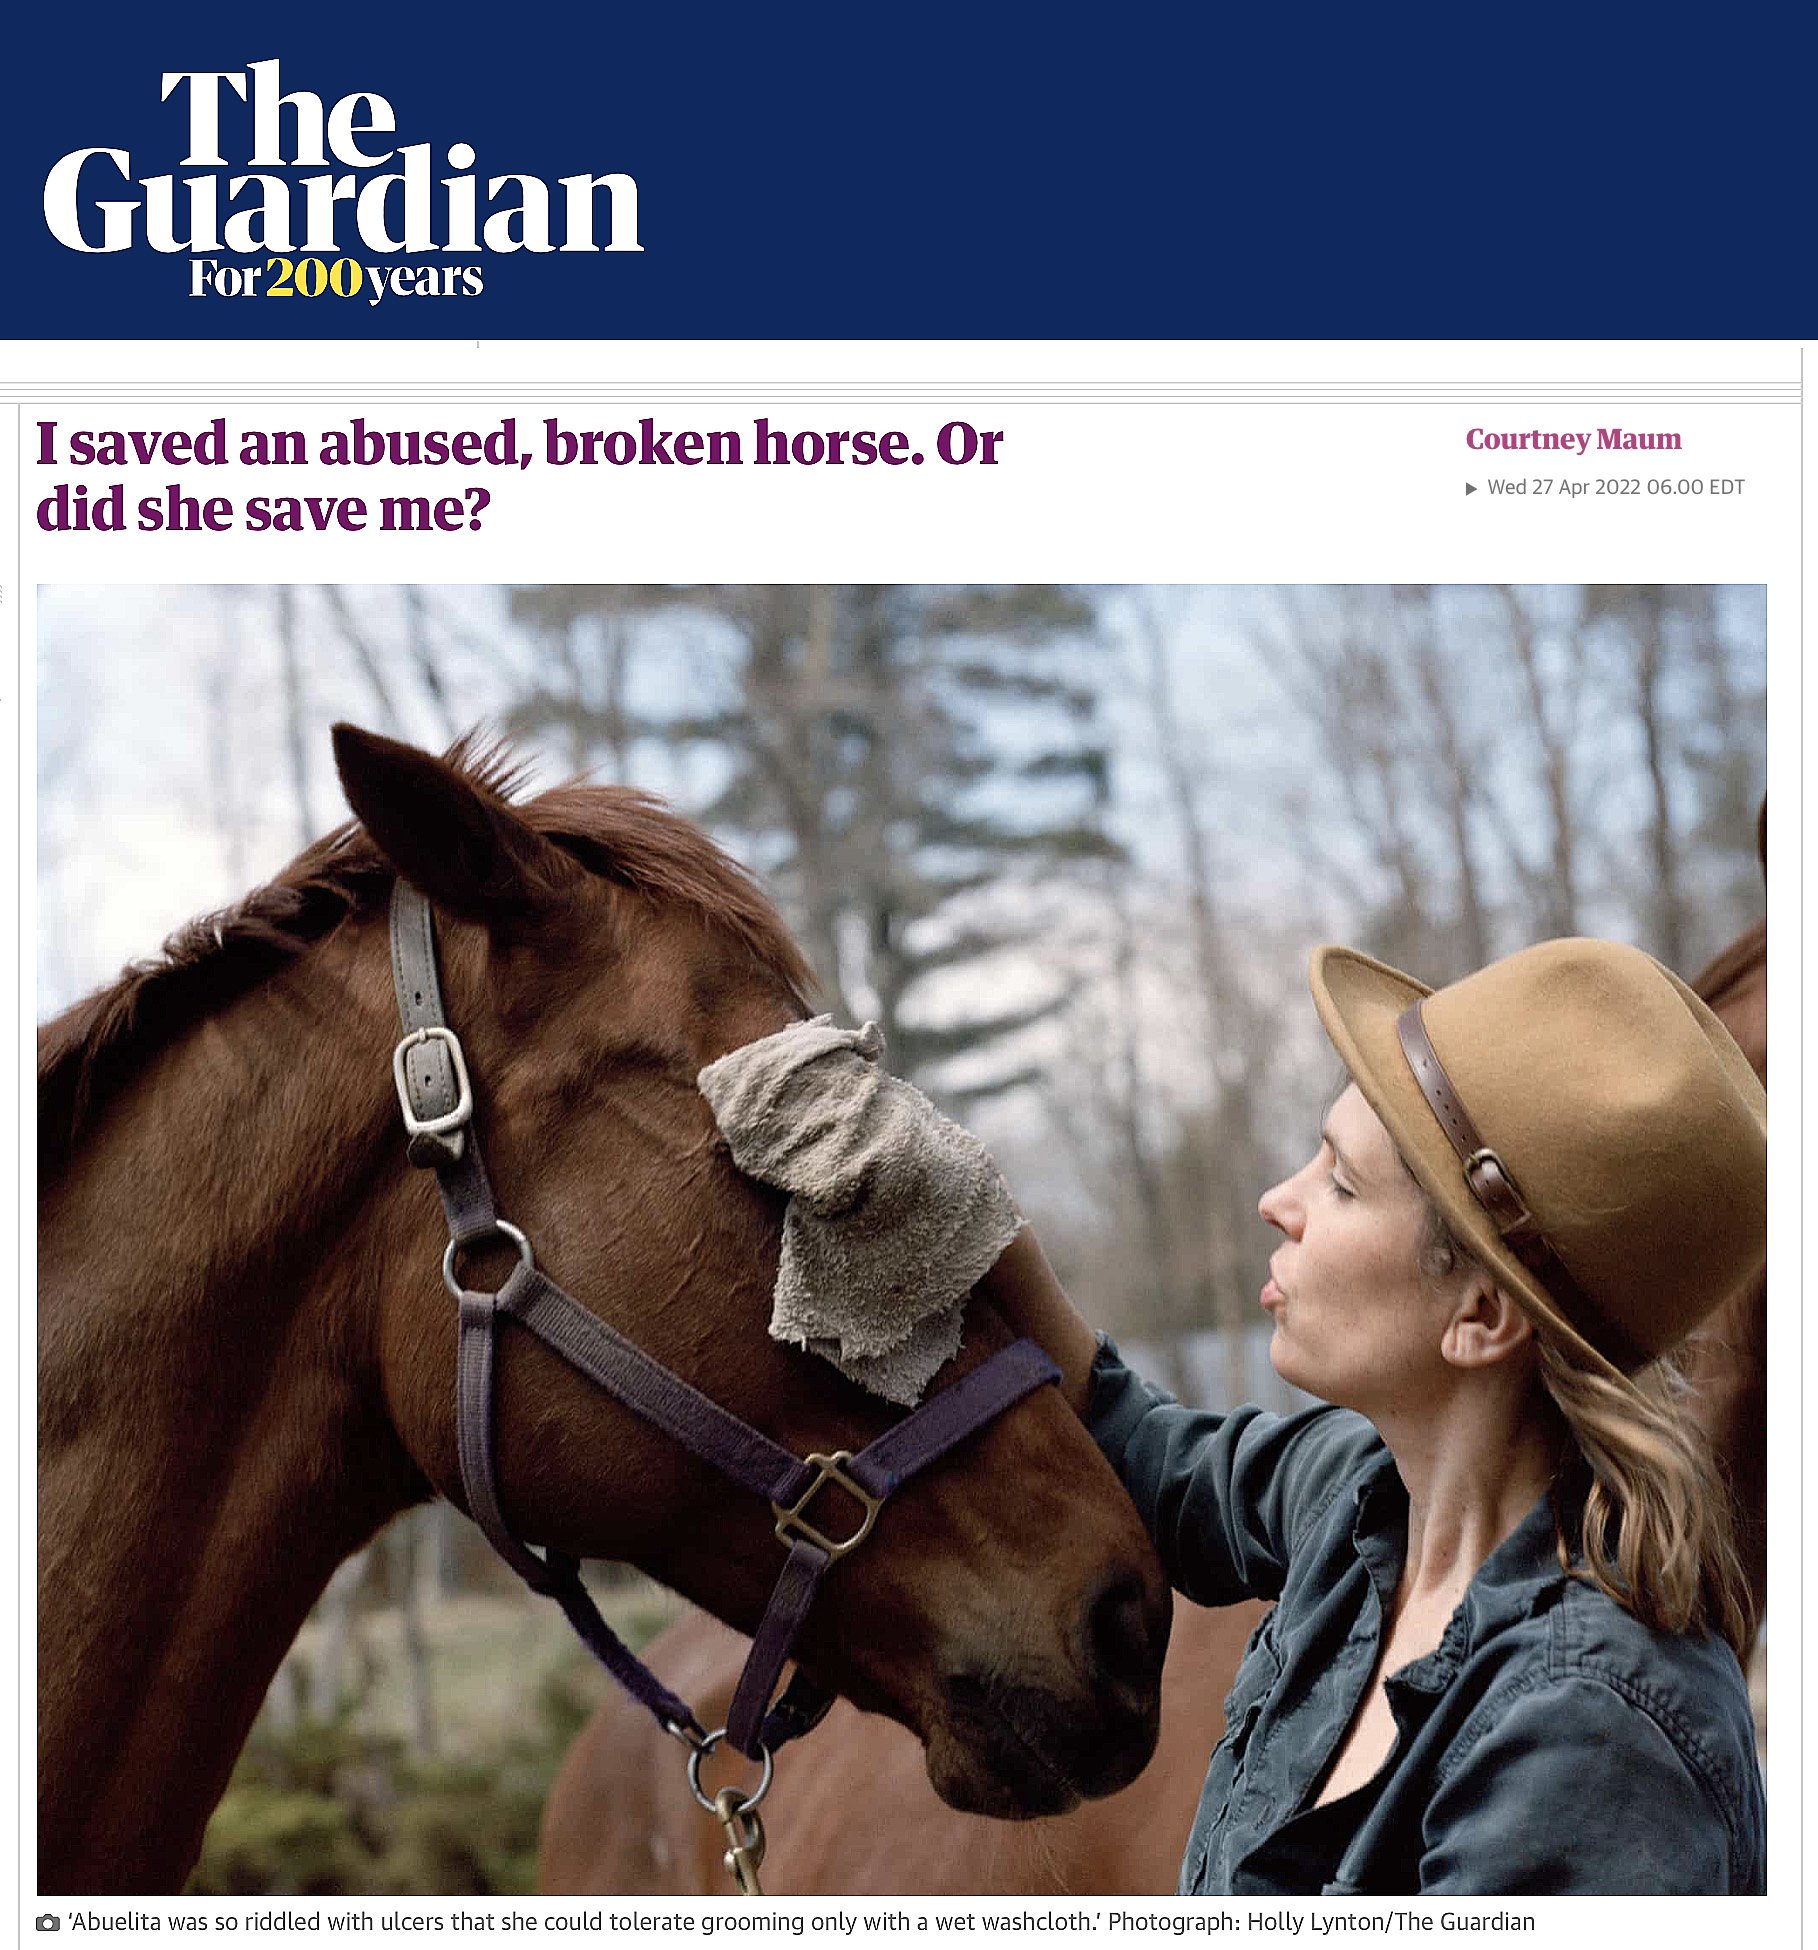  "I Saved an Abused, Broken Horse. Or Did She Save Me?," Courtney Maum,  The Guardian , April 2022 